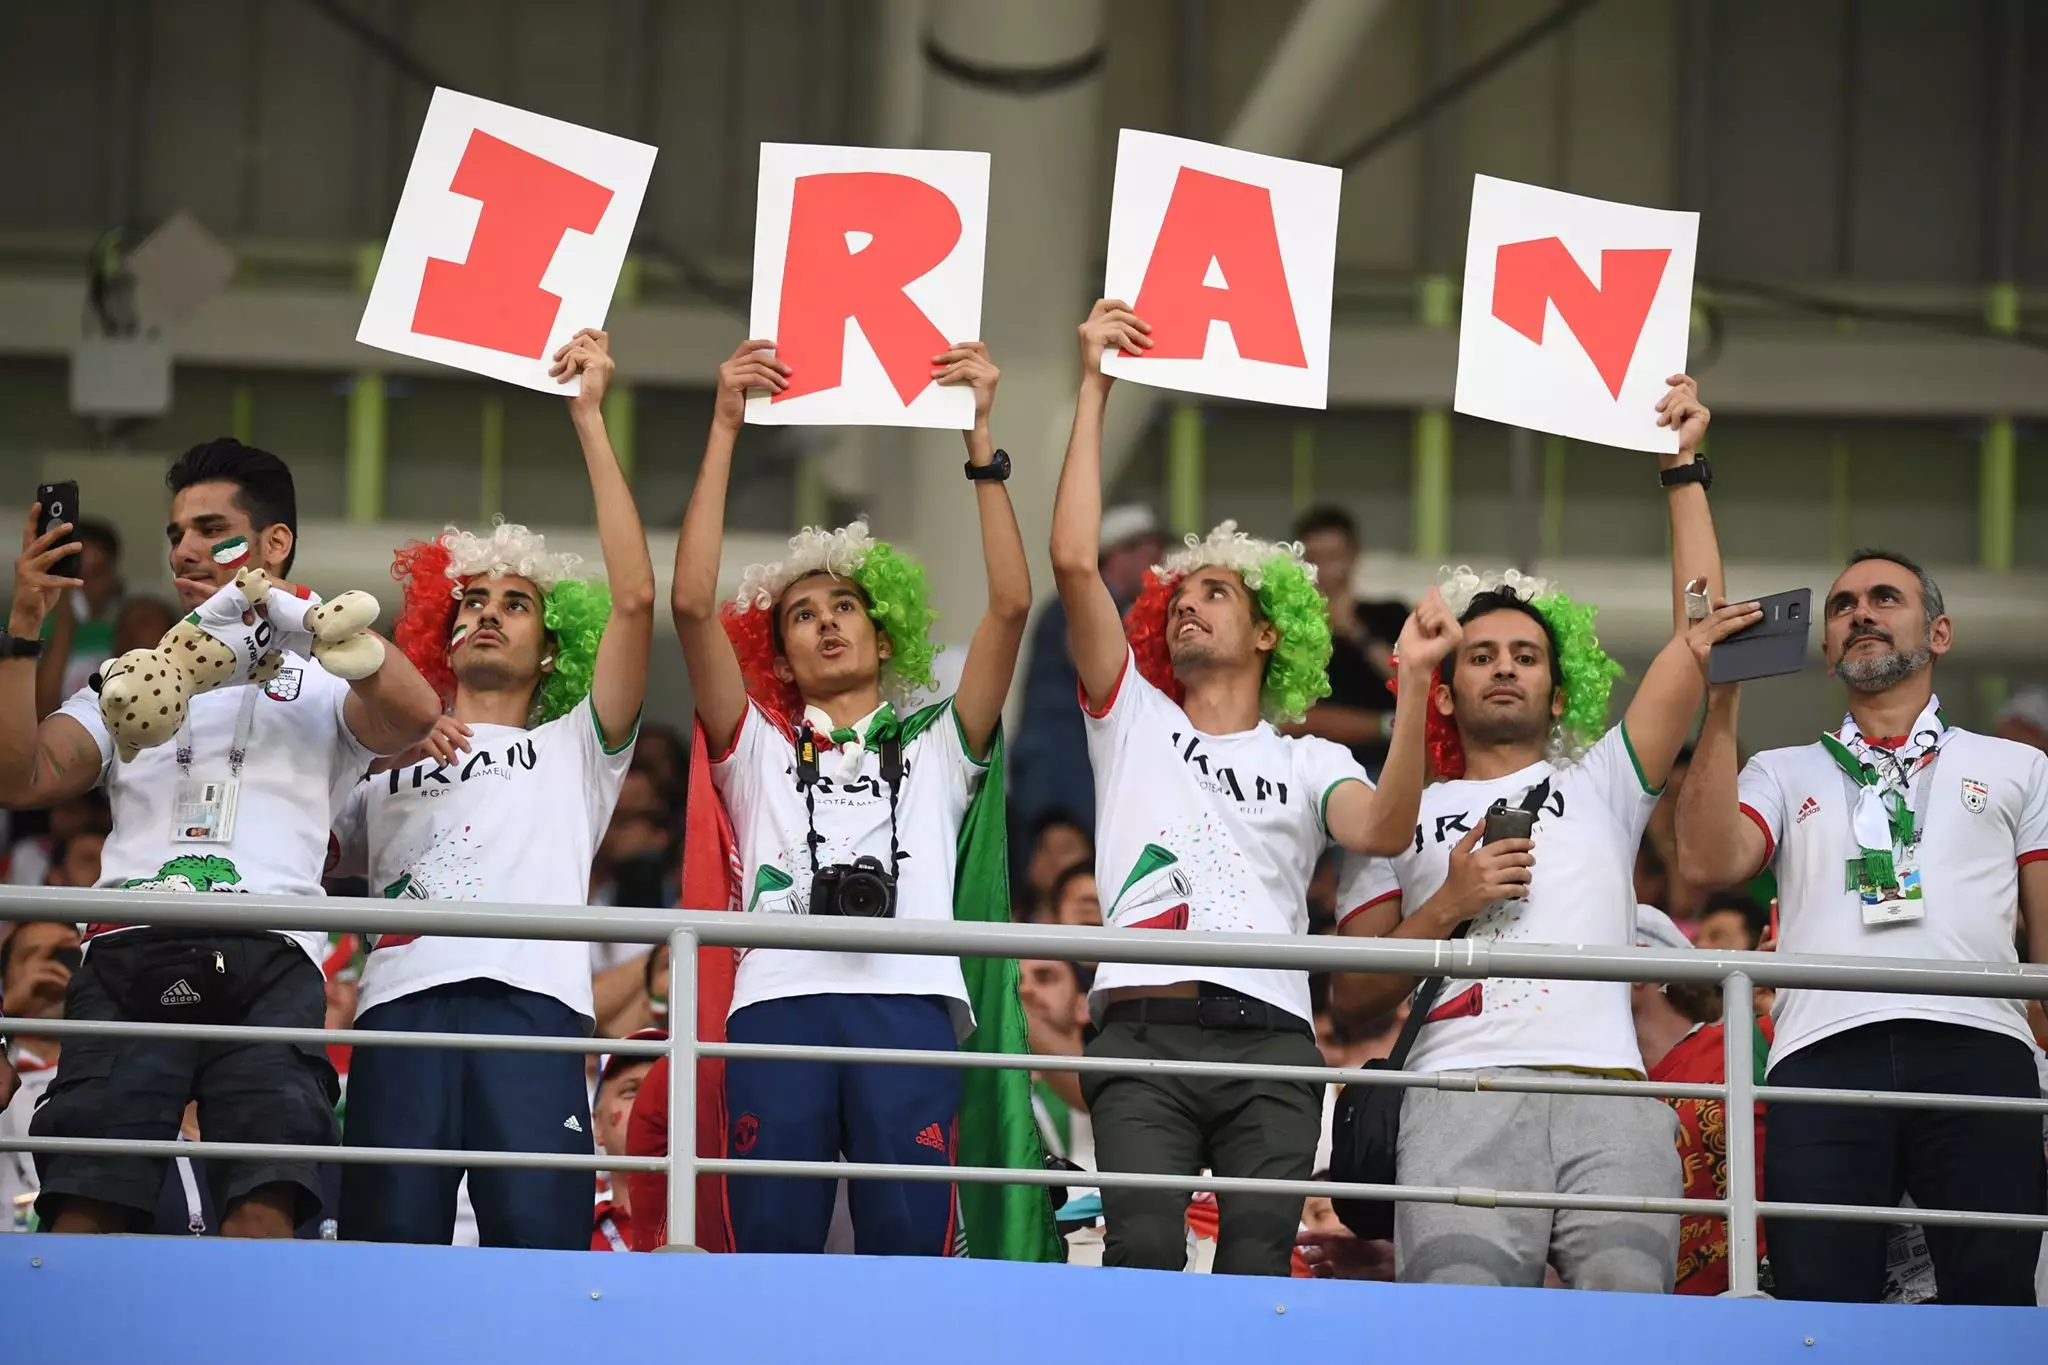 Iran fans at the World Cup. Image: PA